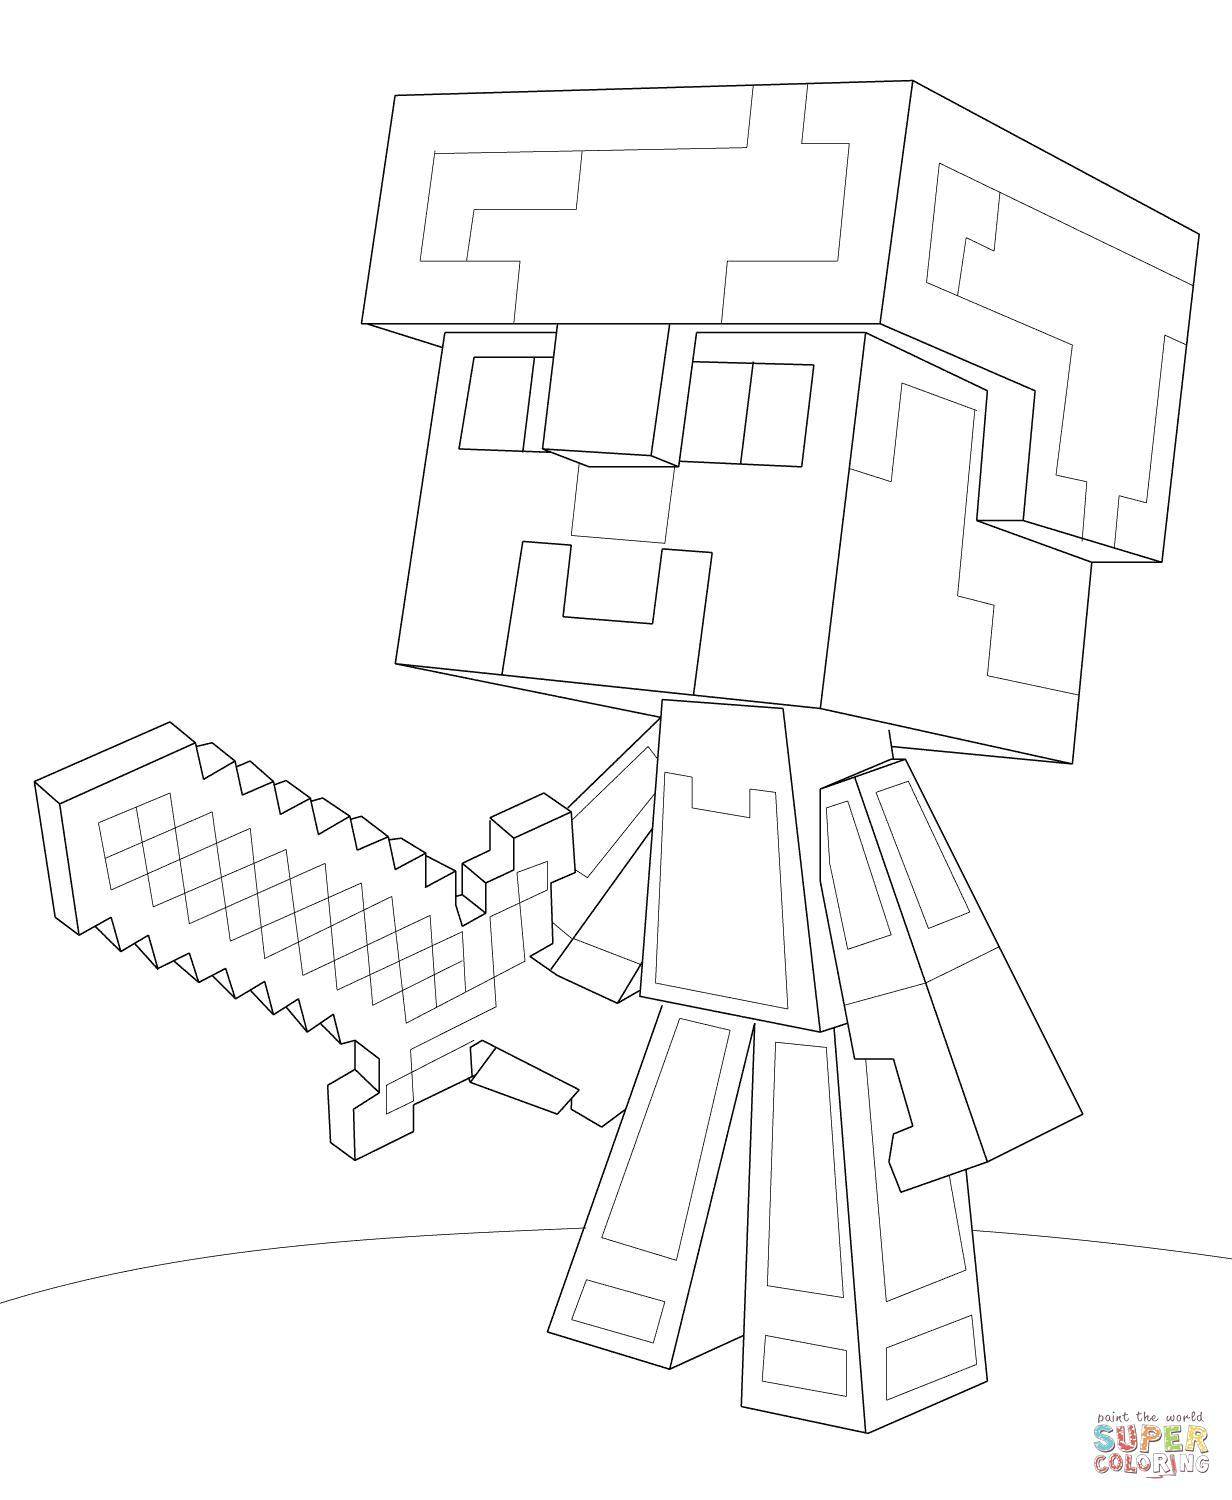 Coloring A fighter with a sword. Category minecraft. Tags:  games, minecraft, characters.